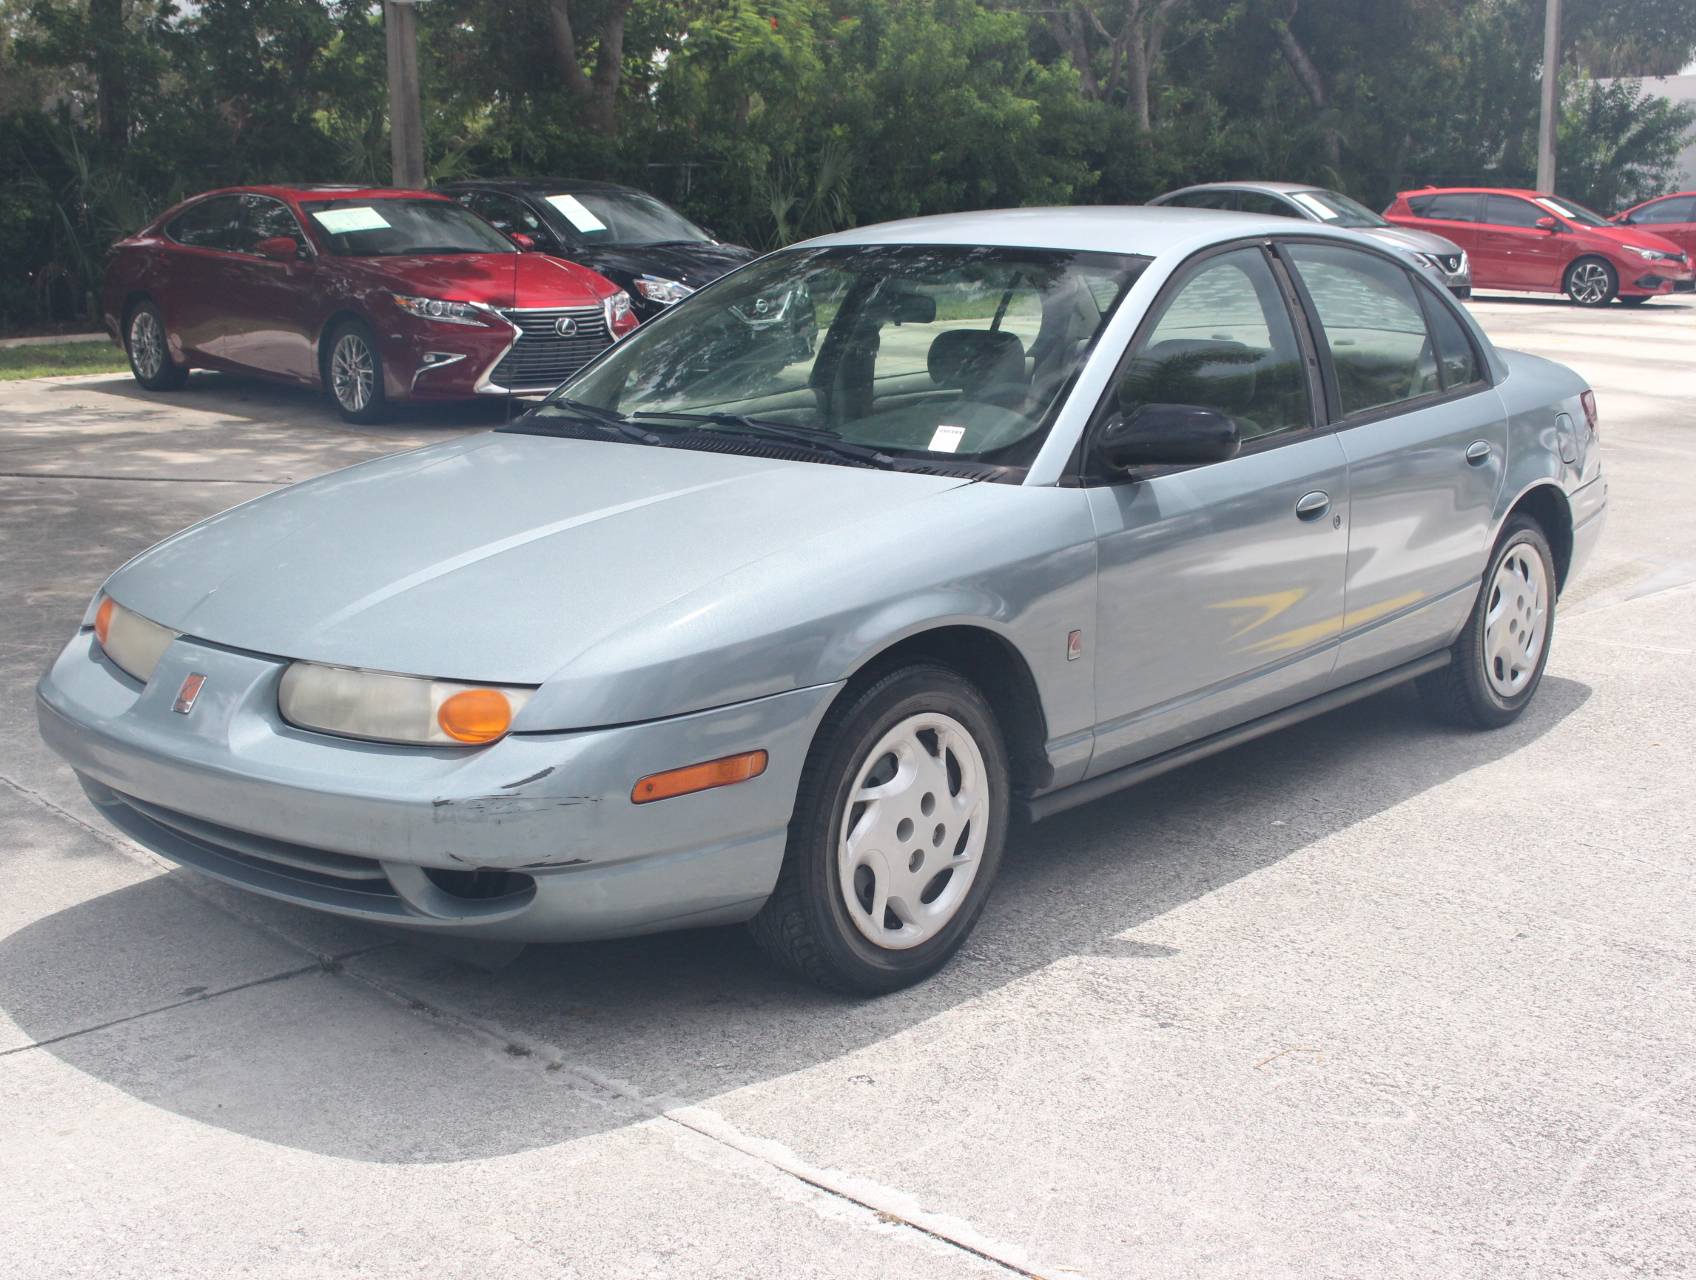 Used 2002 SATURN SL SELECT TRIM for sale in WEST PALM | 115518